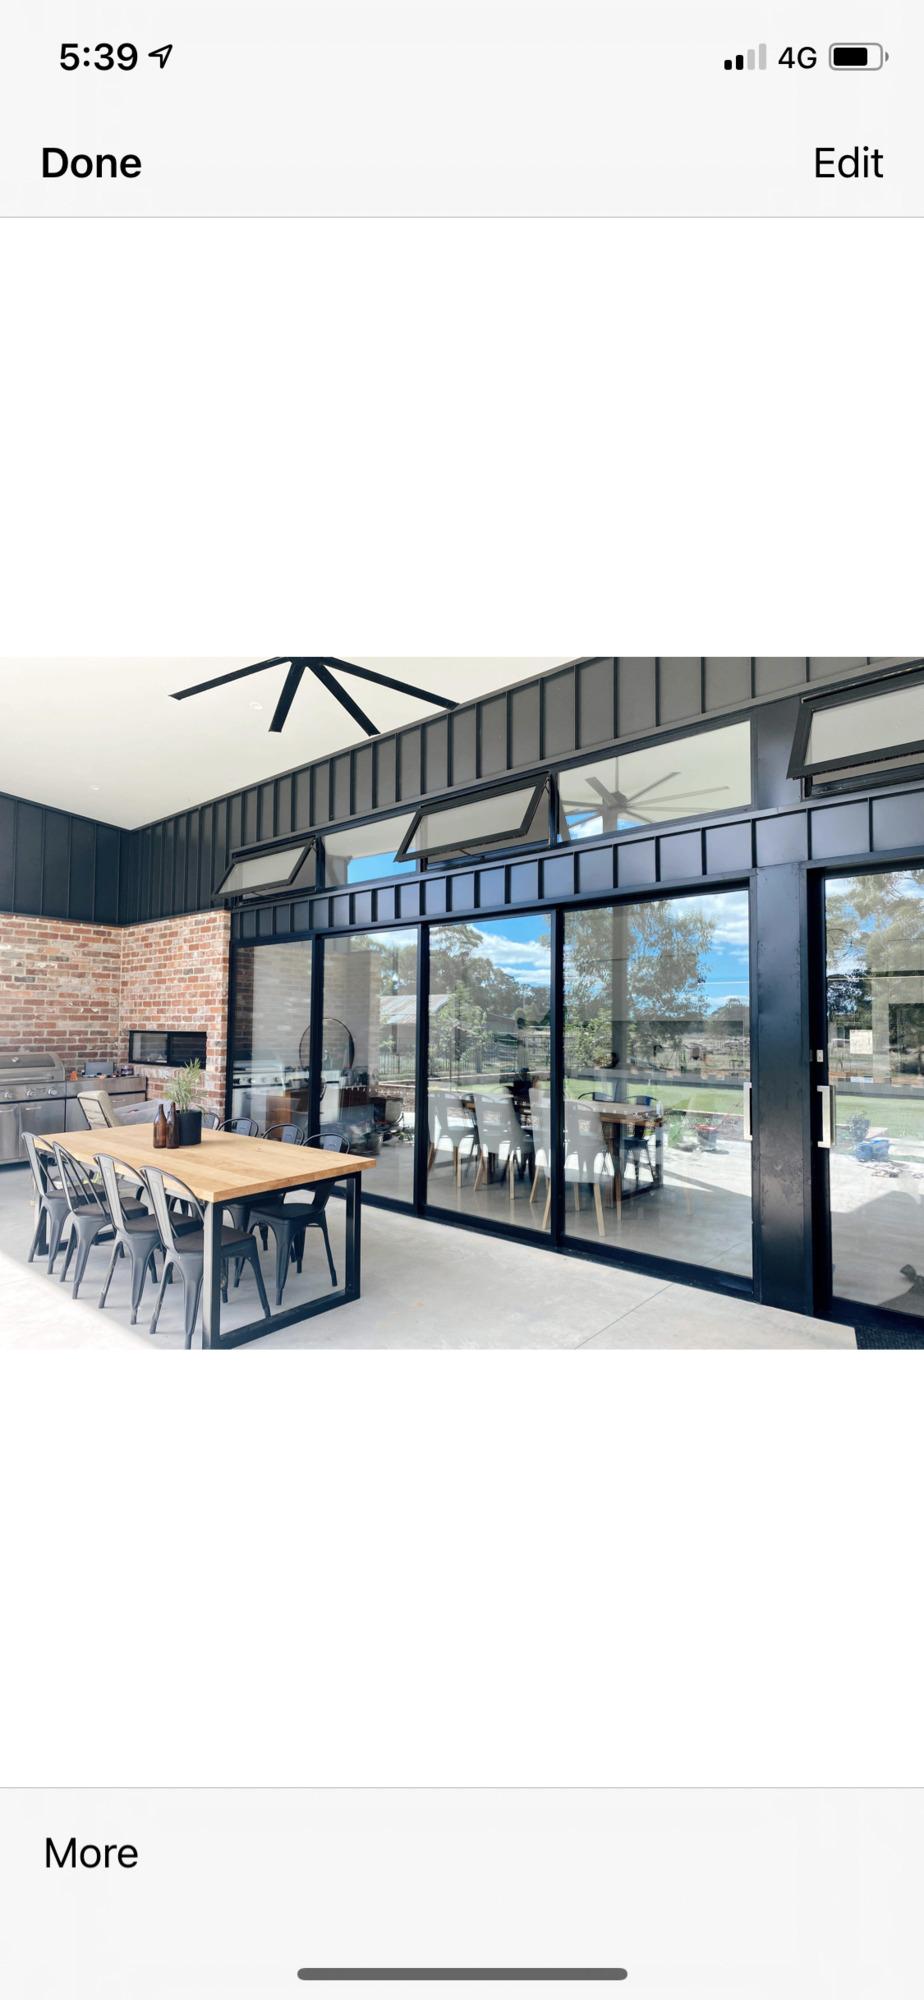 Kymberley from Maiden Gully, VIC loves COLORBOND® steel. Roofing, Guttering & Fascia, Walling, Sheds, Patio & Pergola made from COLORBOND® steel in colour Monument®